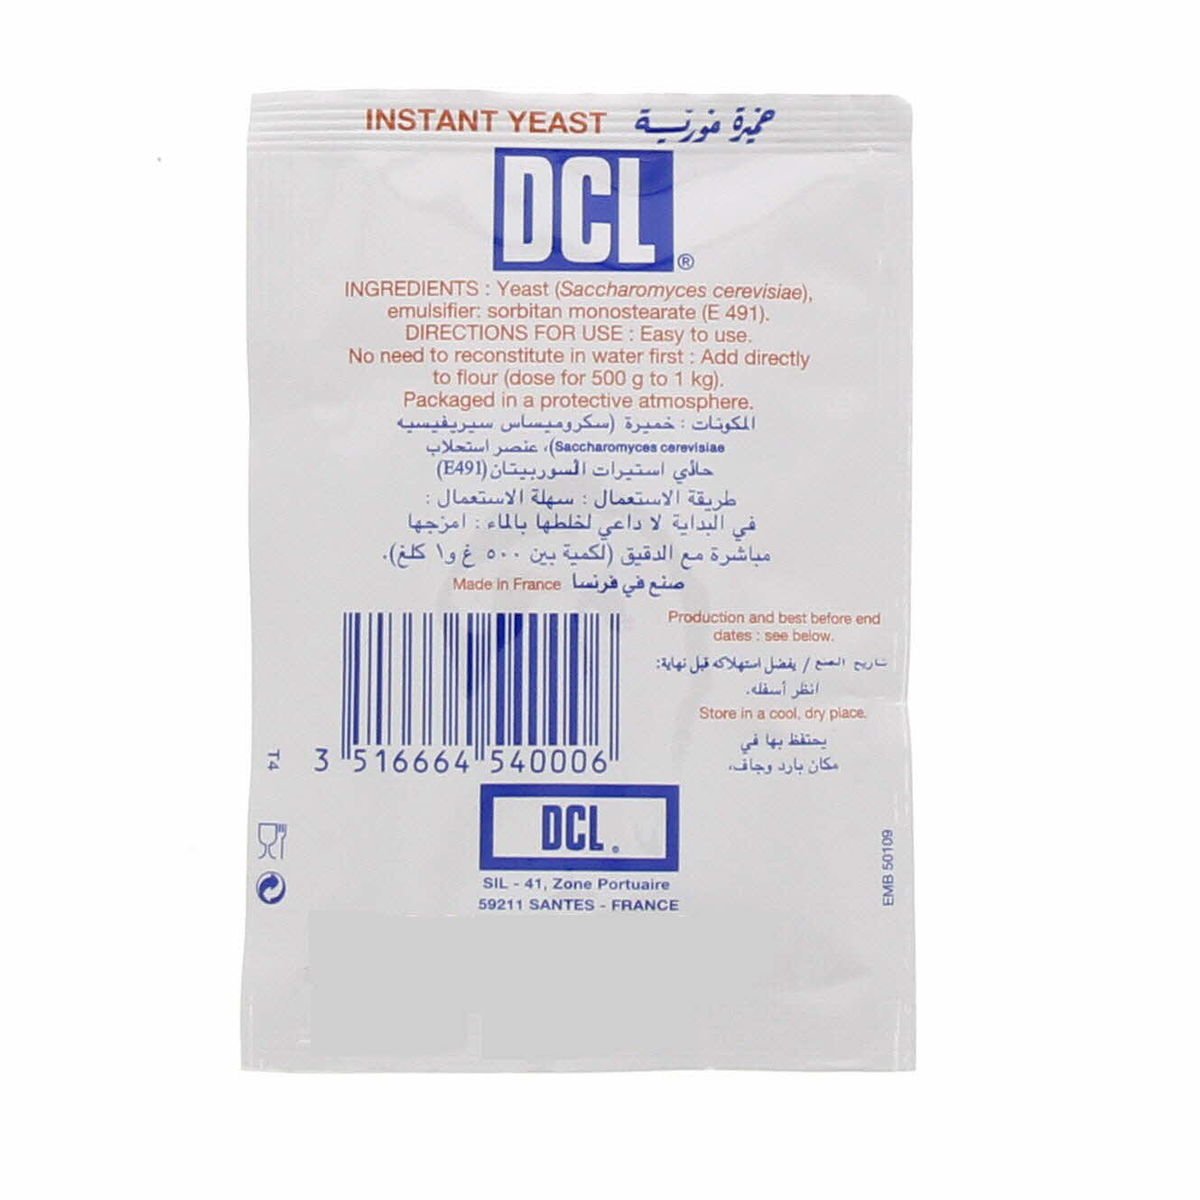 DCL Instant Yeast 12 x 11 g